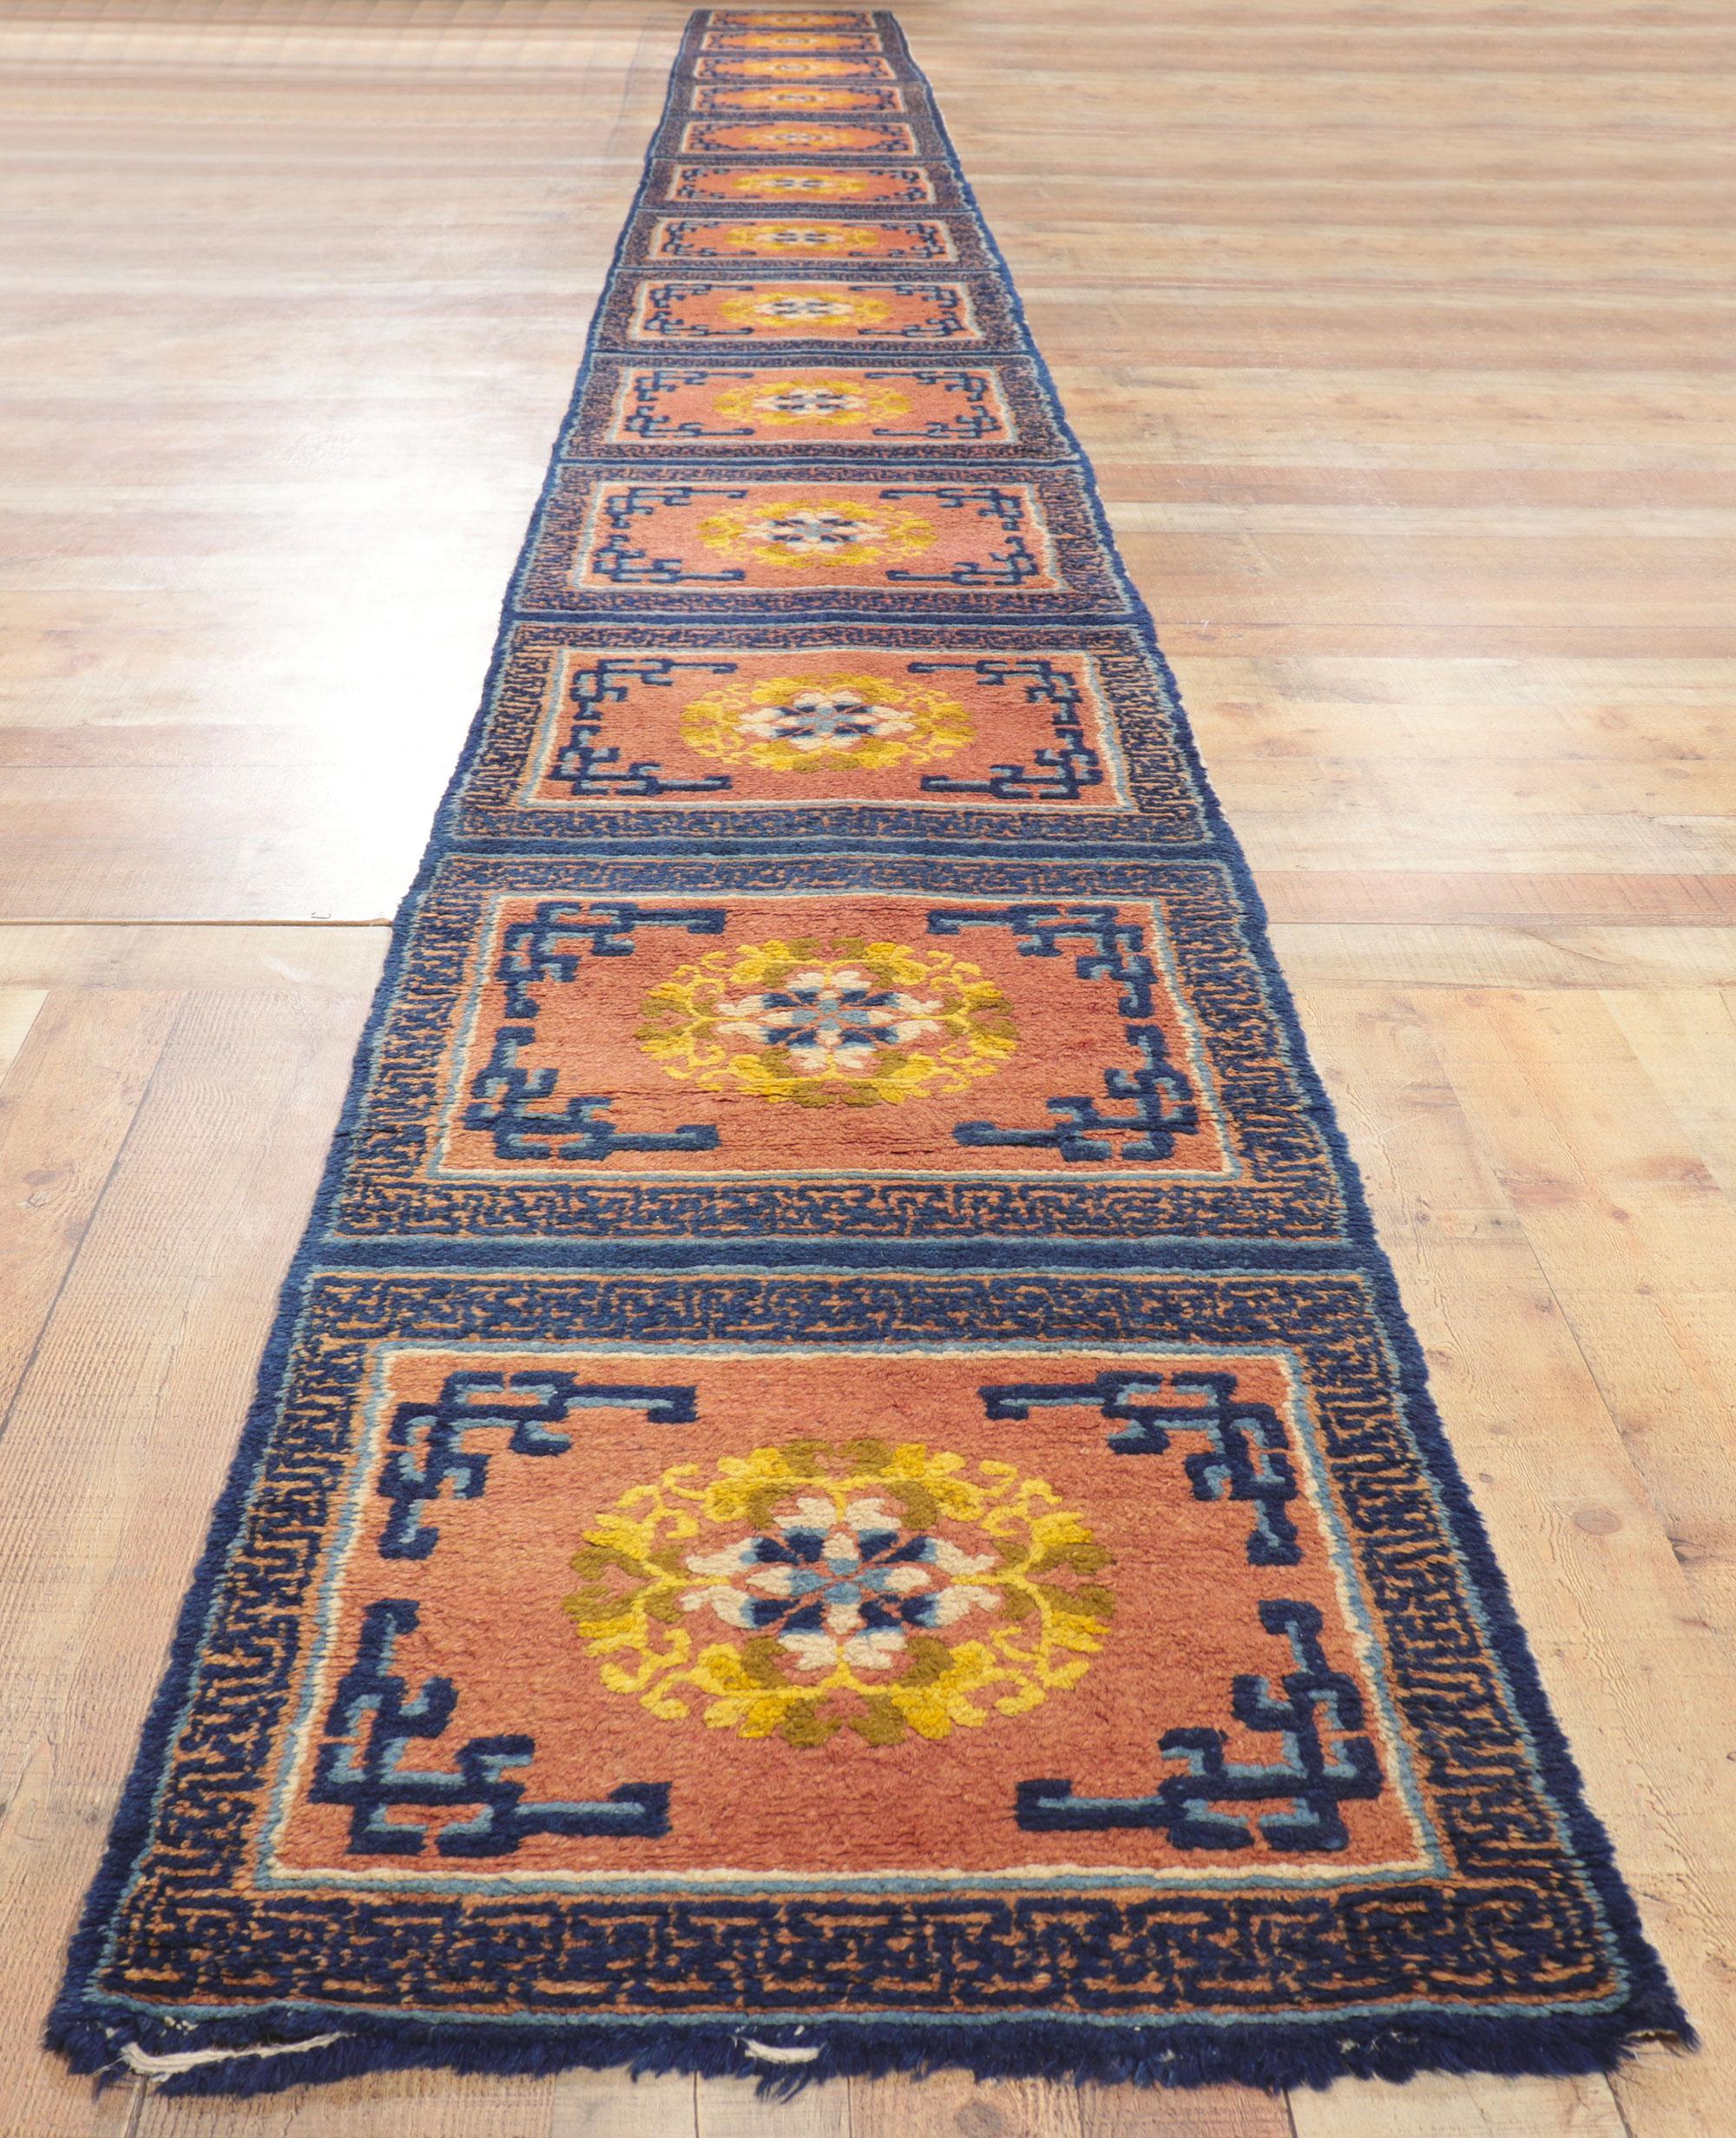 78450 Antique Chinese Ningxia bench runner meditation mat, 02'01 x 25'08.
With its incredible detail and texture, this hand knotted wool antique Chinese Ningxia bench runner is a captivating vision of woven beauty. The traditional Chinese style and